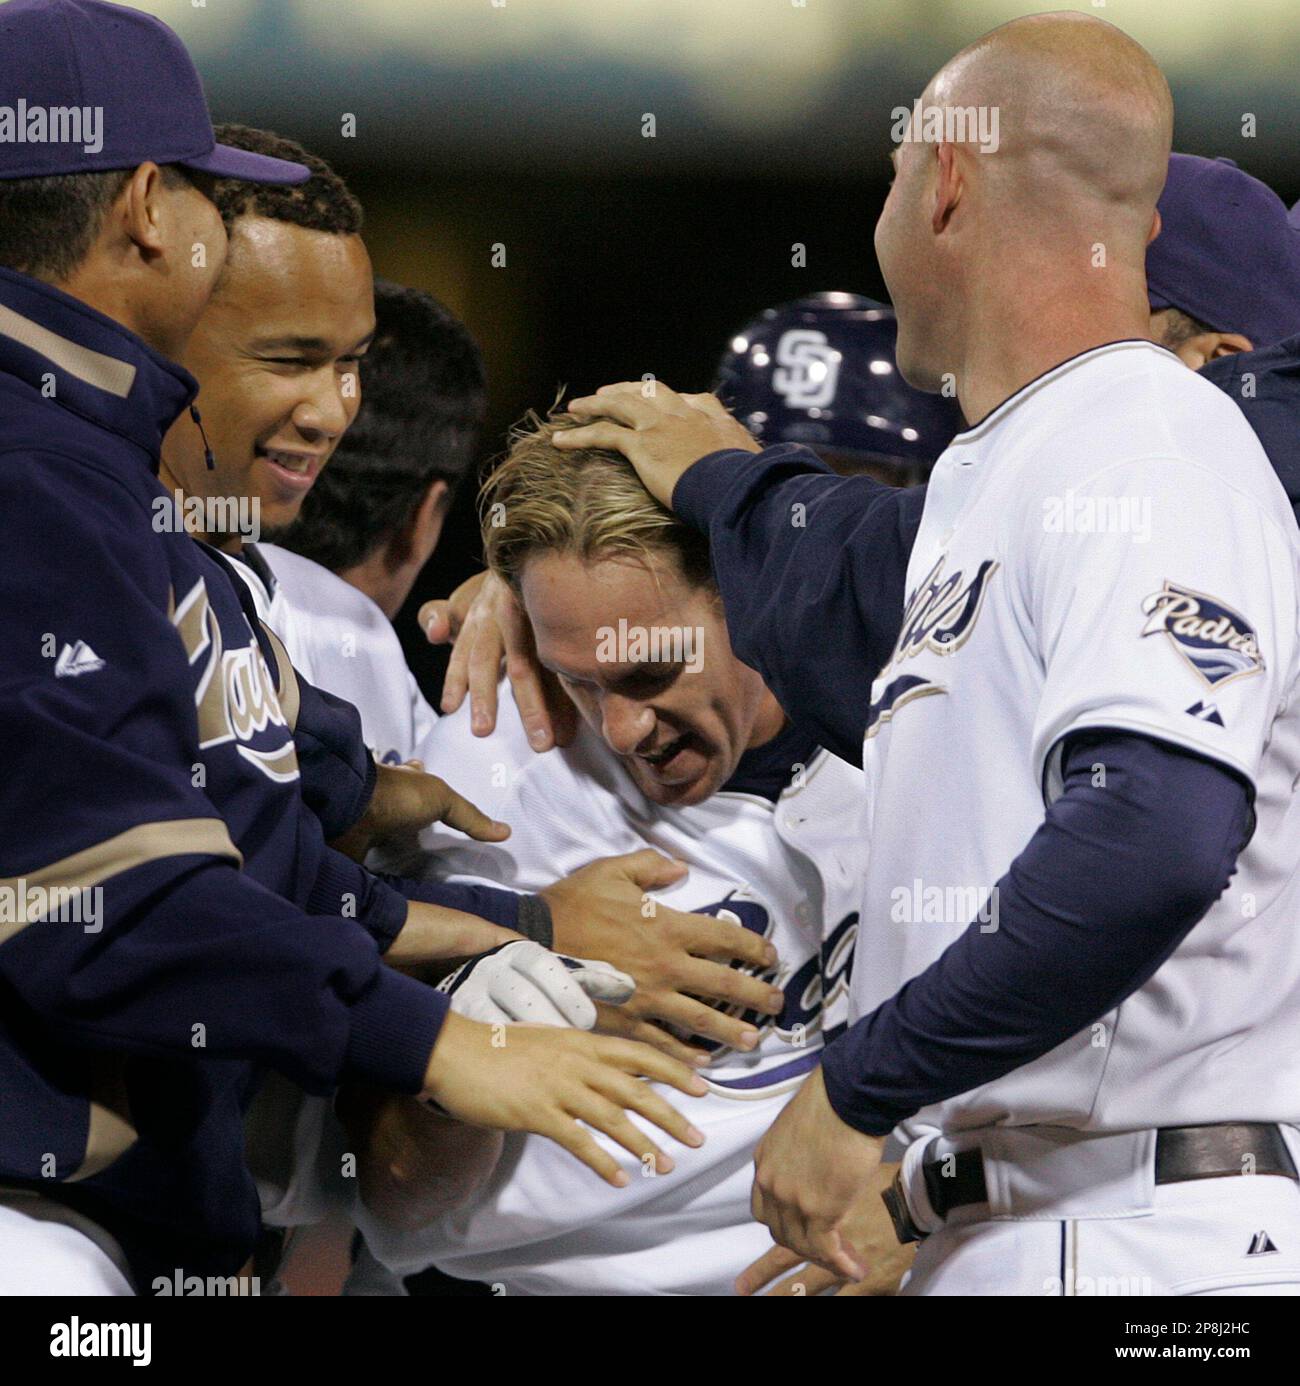 San Diego Padres' Brian Giles, center, is mobbed by teammates after his  game winning hit in the 11th inning gave the Padres a 4-3 victory over the  Pittsburgh Pirates during their baseball